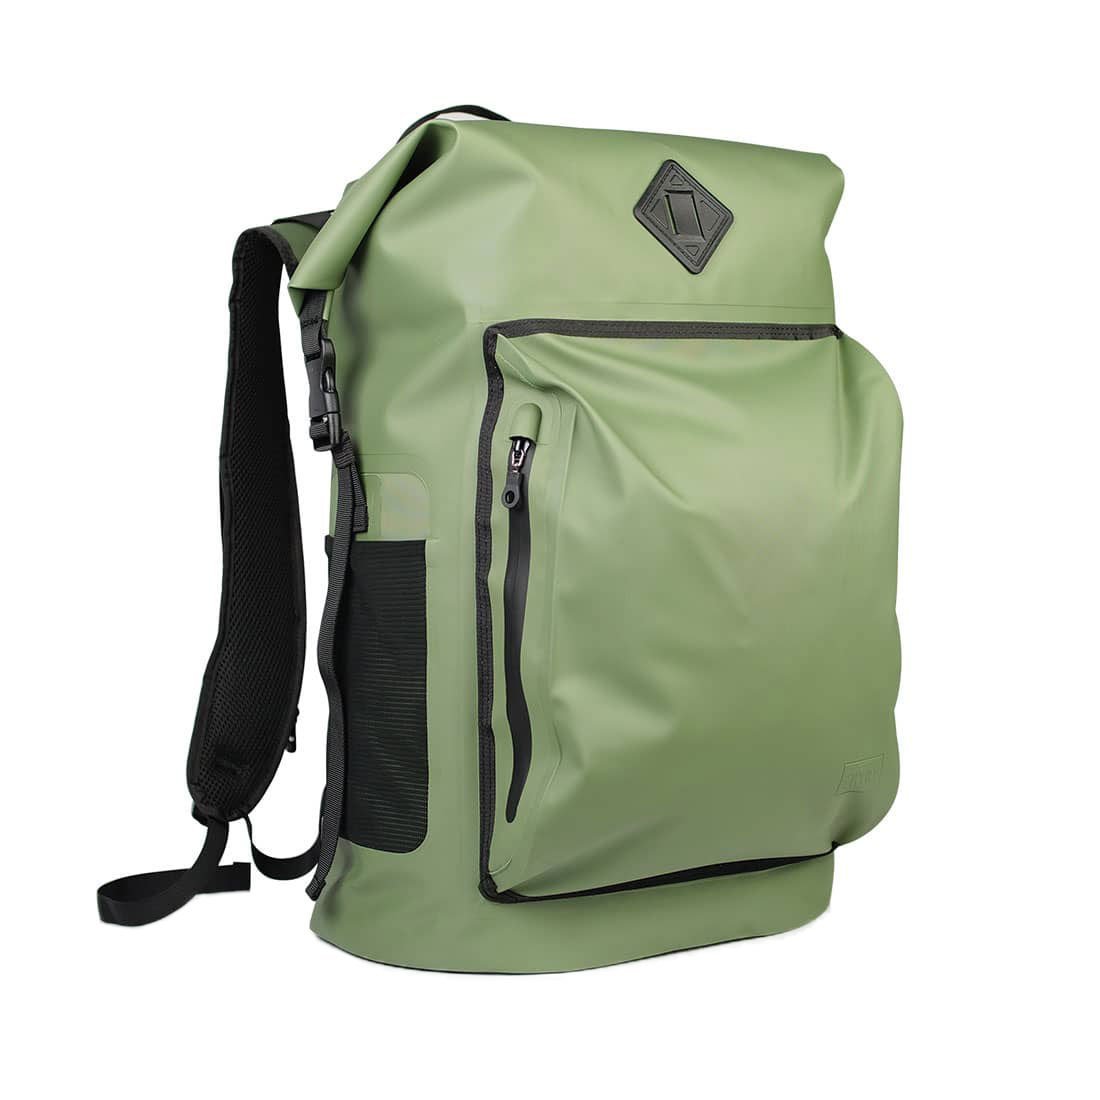 https://www.420science.com/cdn/shop/products/ryot-smellproof-dry-backpack-bags-cases-420-science-755881.jpg?v=1628768730&width=1280